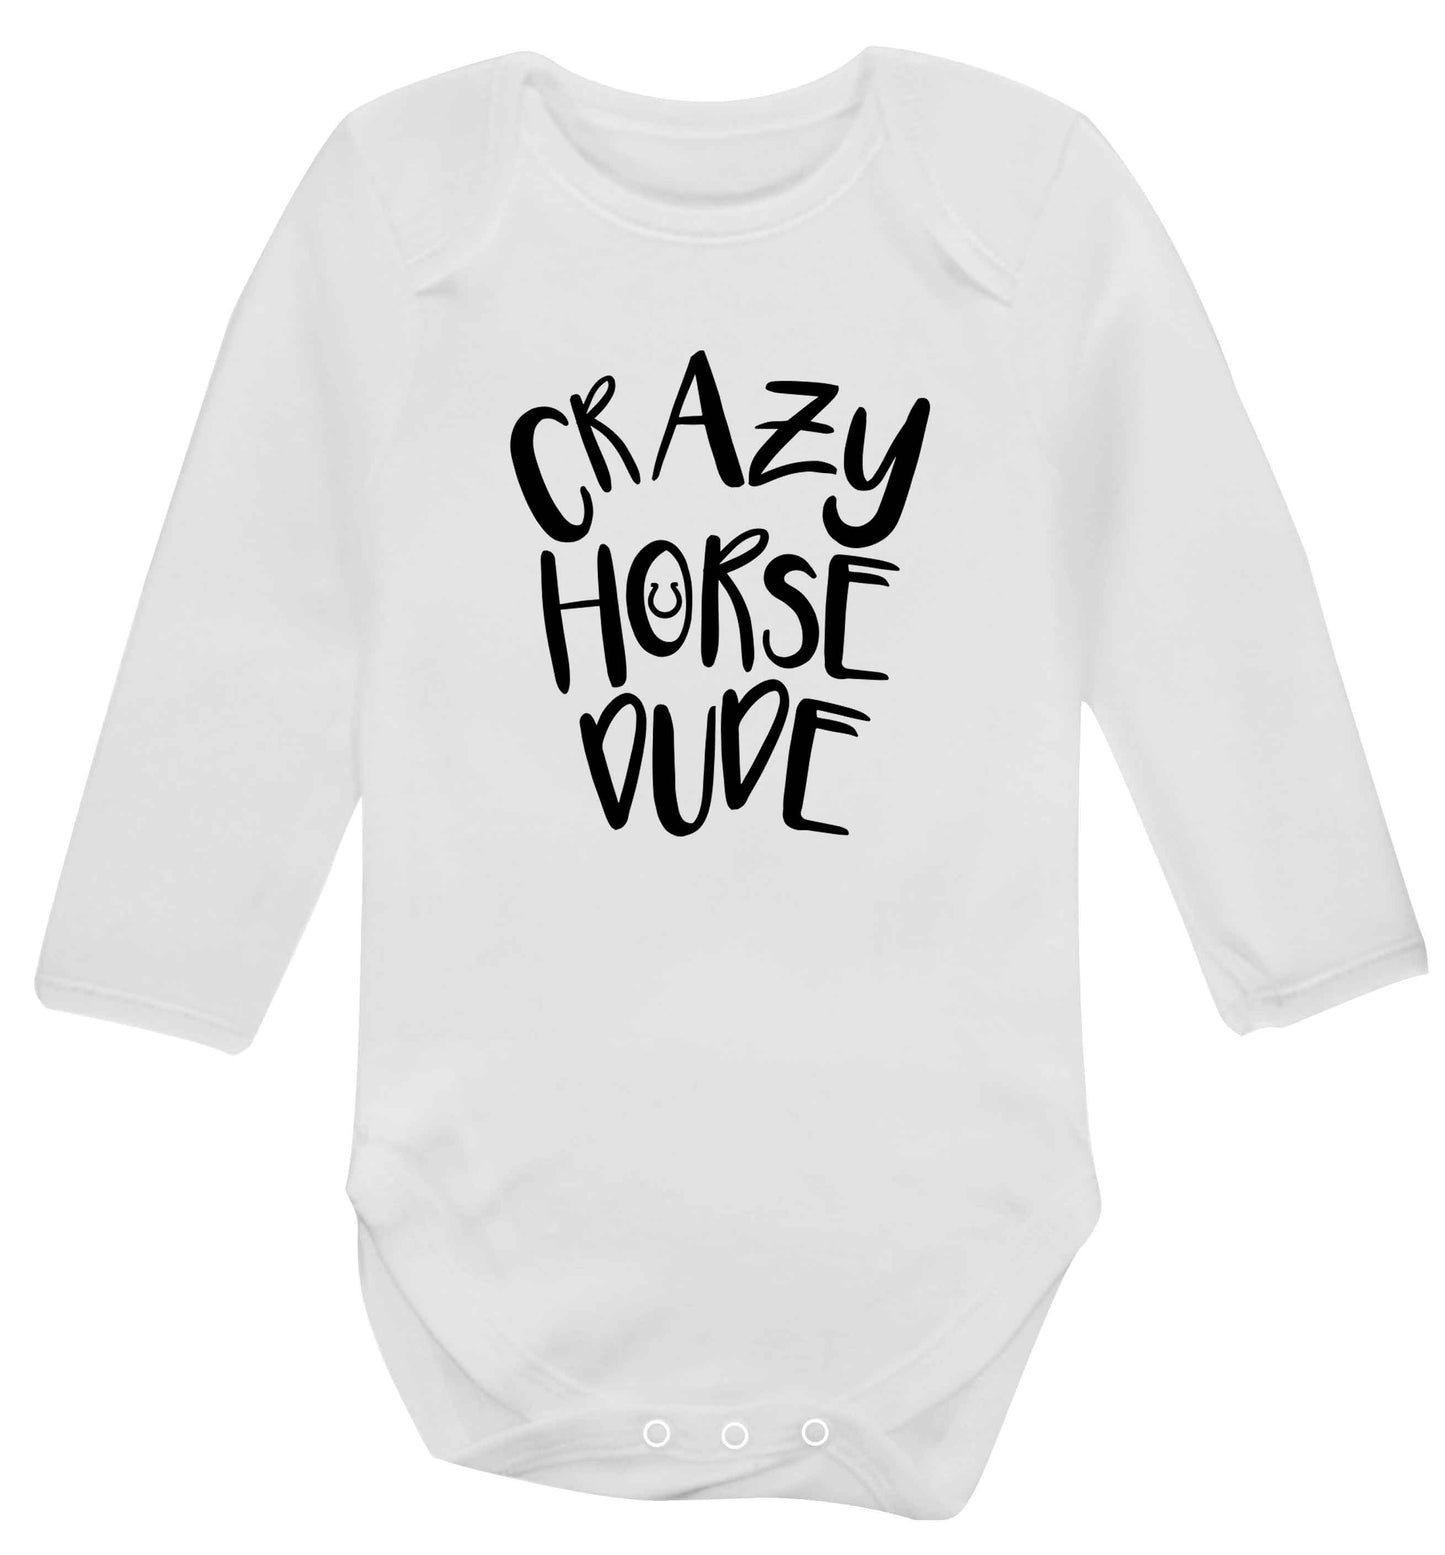 Crazy horse dude baby vest long sleeved white 6-12 months